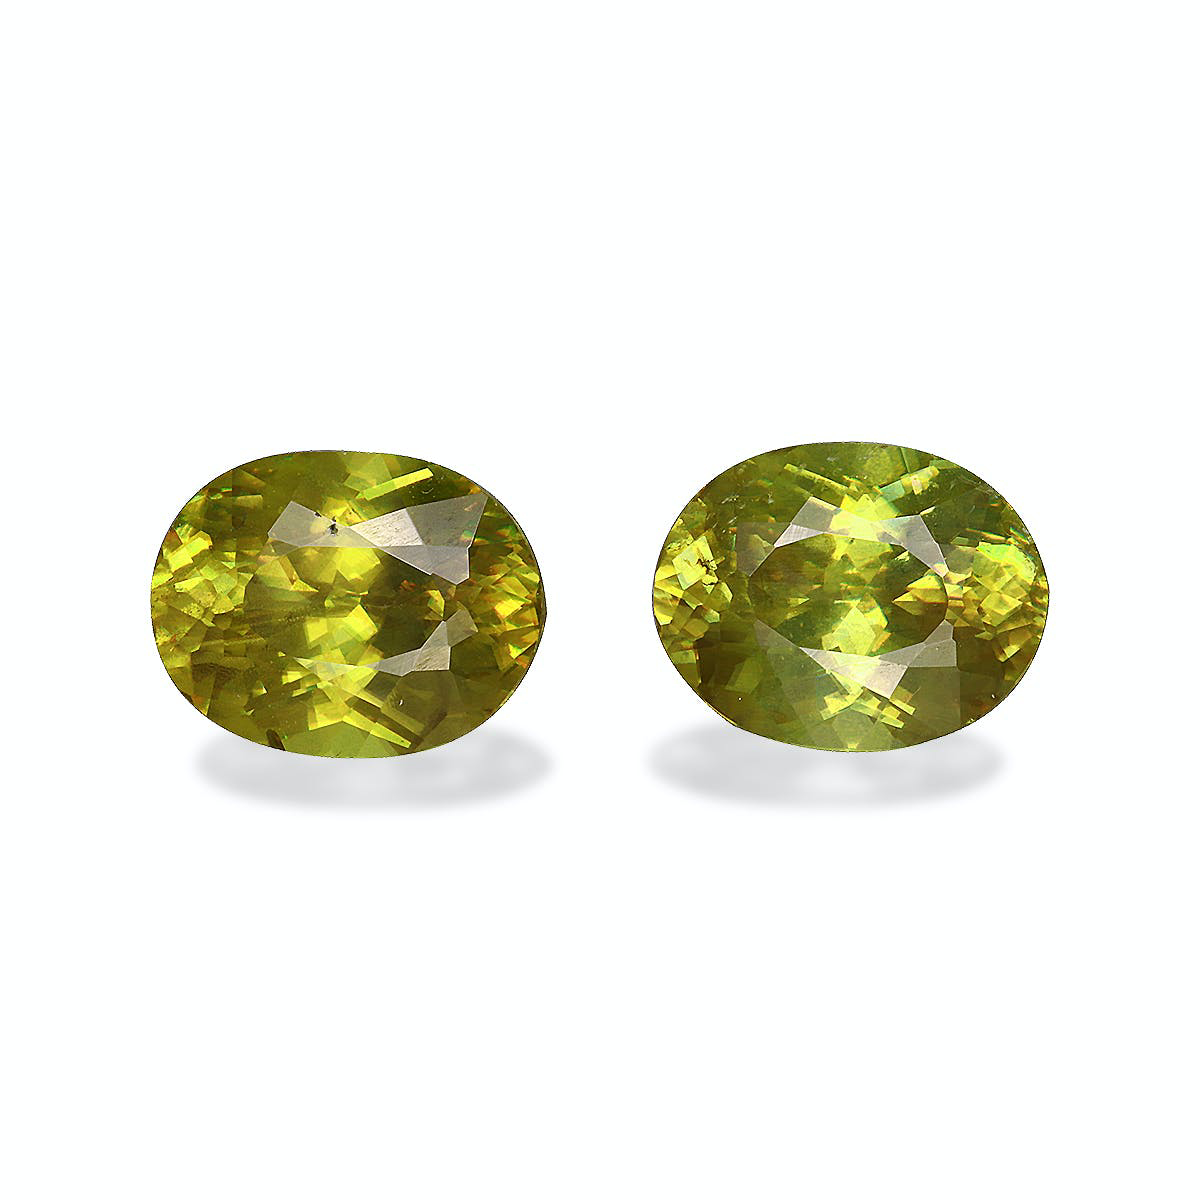 Picture of Yellow Sphene 4.90ct - 9x7mm Pair (SH0688)